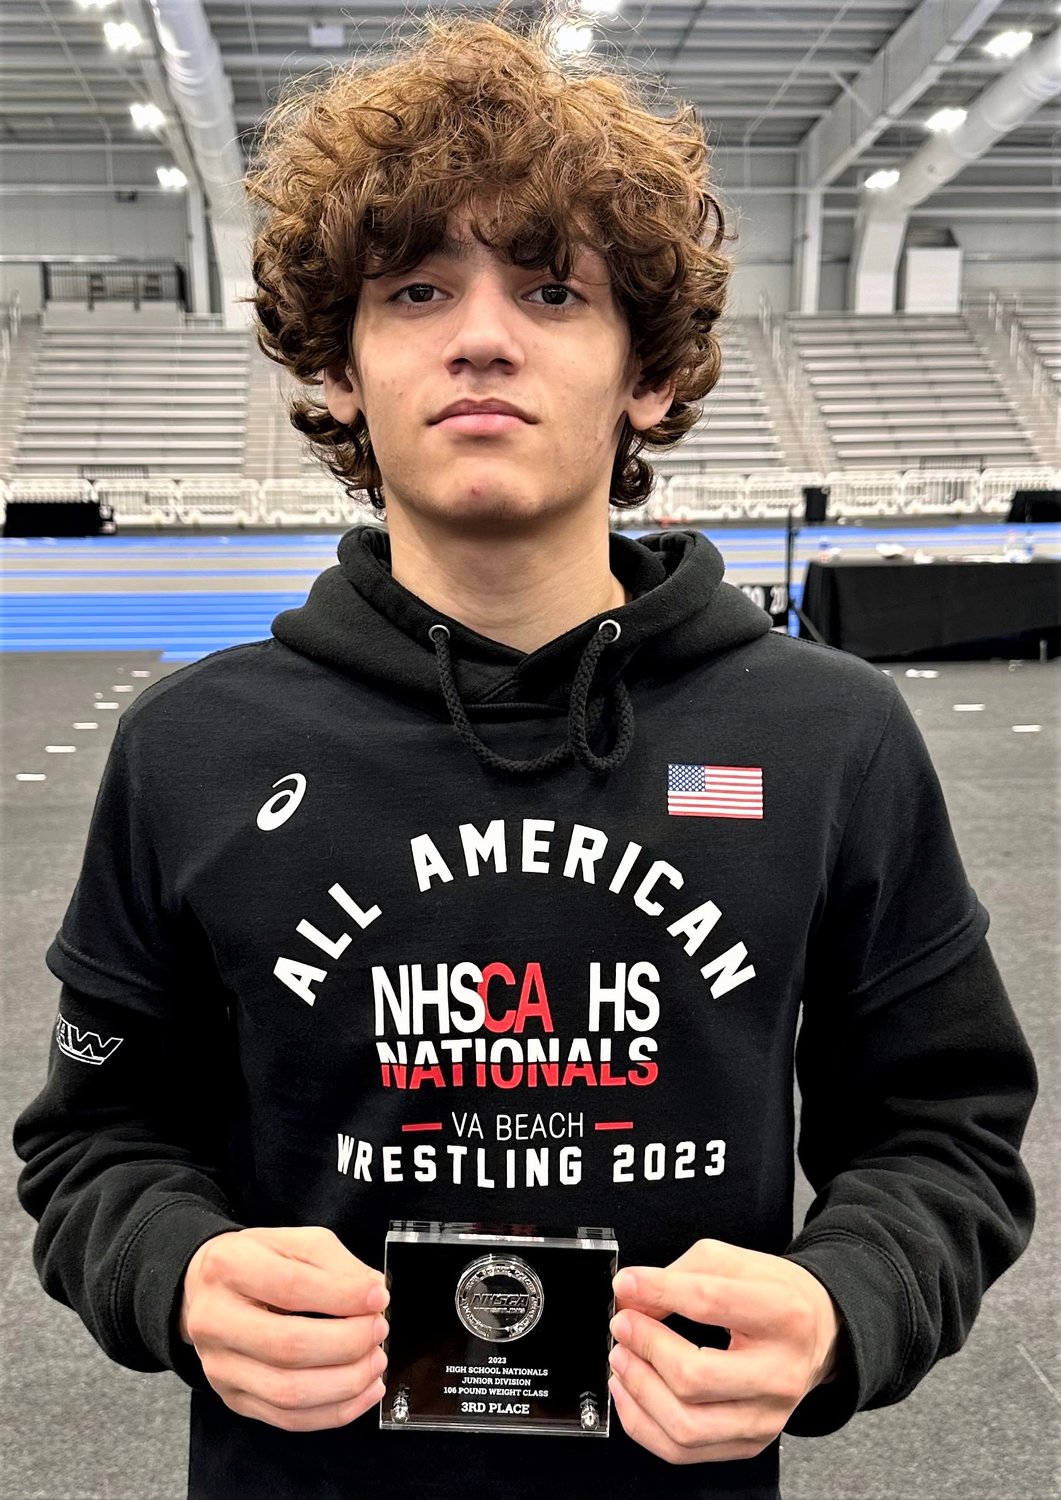 Samuel Aponte of Cape Fear High School was recognized as an All American wrestler at the National High School Coaches Association wrestling tournament in Virginia Beach, Virginia.